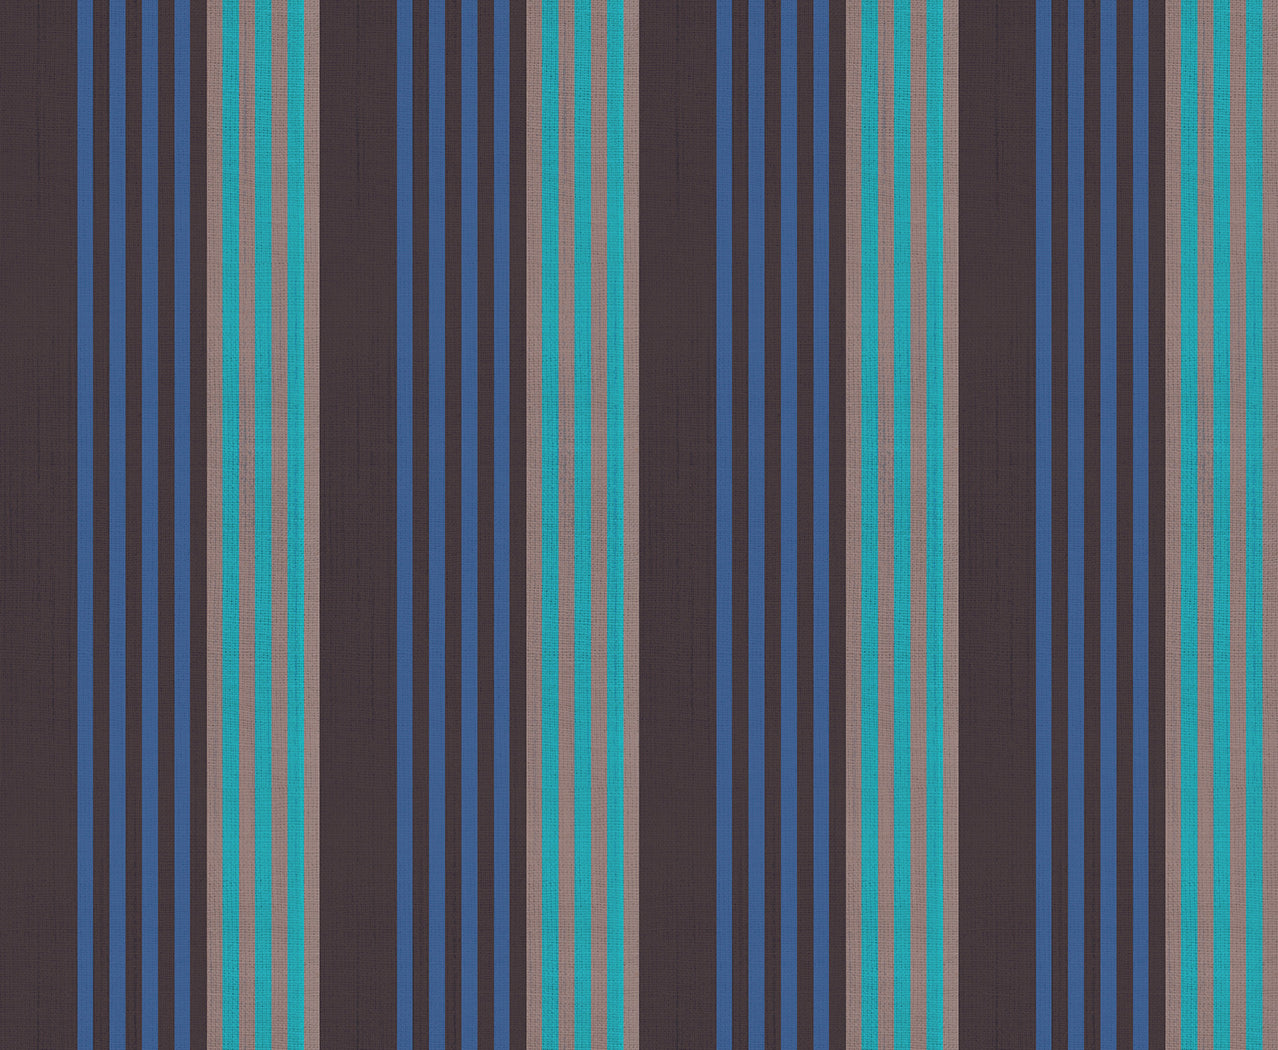 Warp & Weft ooh Lucky Lucky by Alexia Marcelle Abegg : Ribbon Stripe Soft Black RS4126 11 (Estimated Arrival Mar. 2025)